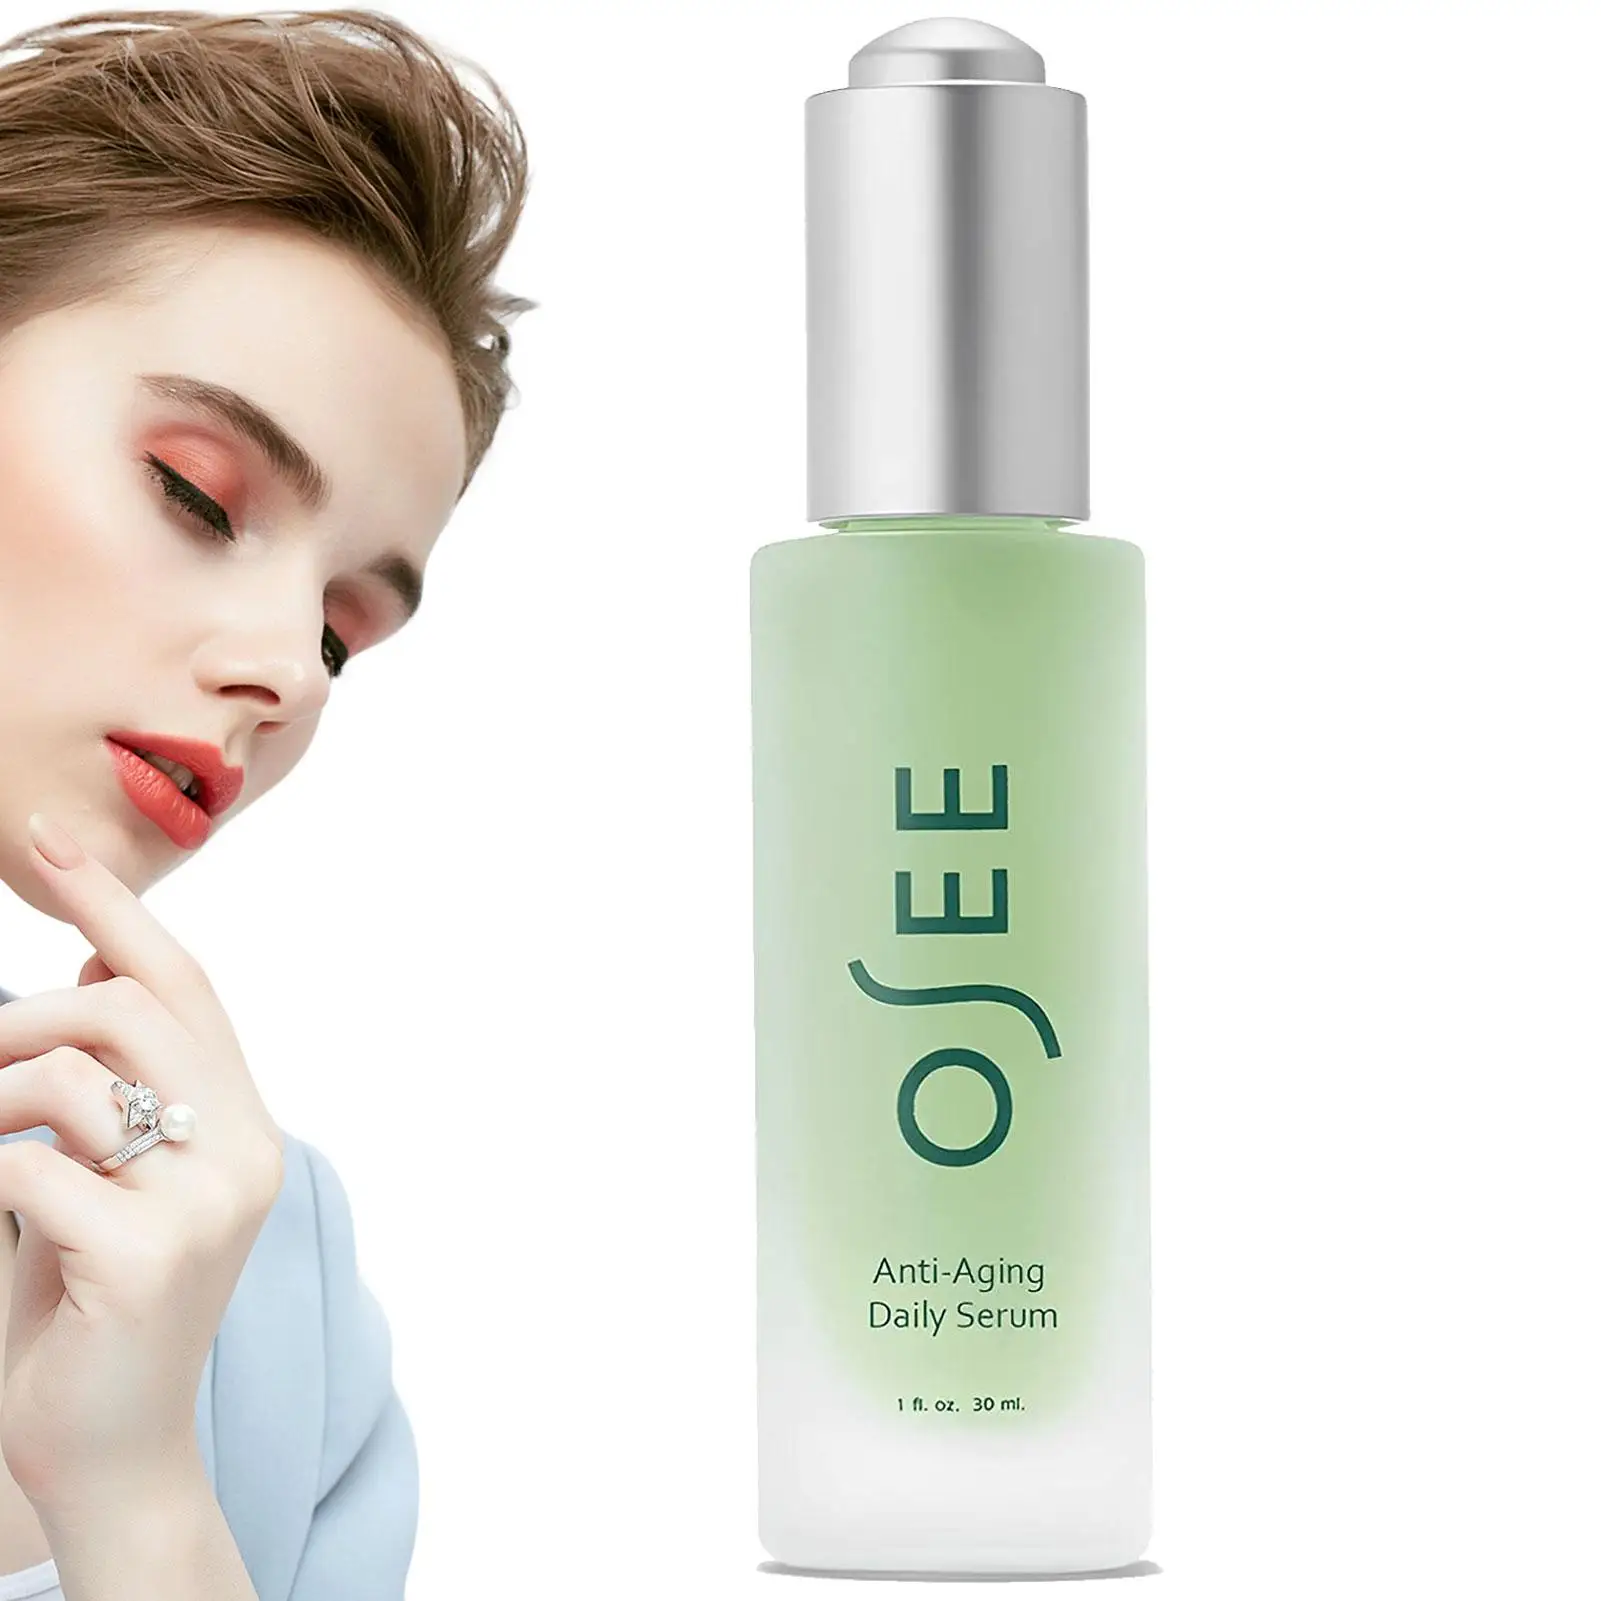 

Osee Face Syrum Repair Facial Skin Moisturizing Essence Lightweight And Non-Greasy Essence For Firmer Looking Skin And Reducing